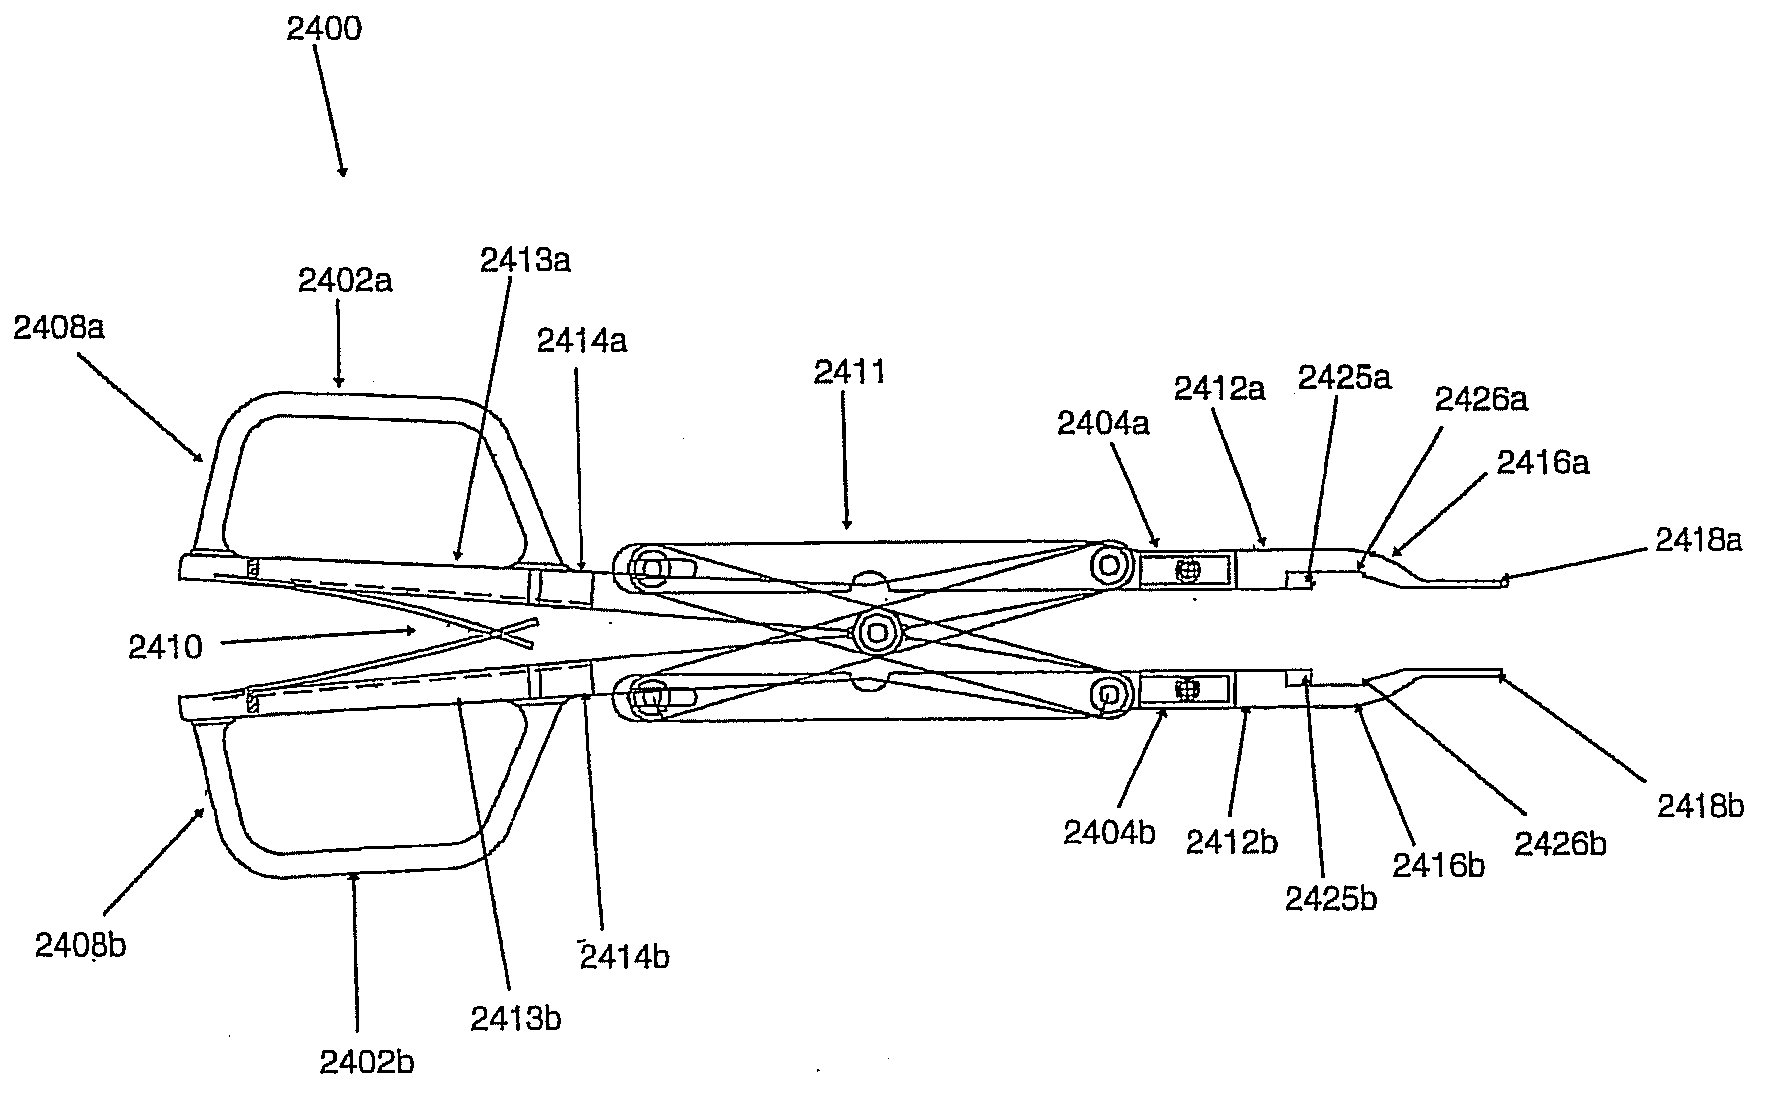 Spinal implant apparatus, method and system